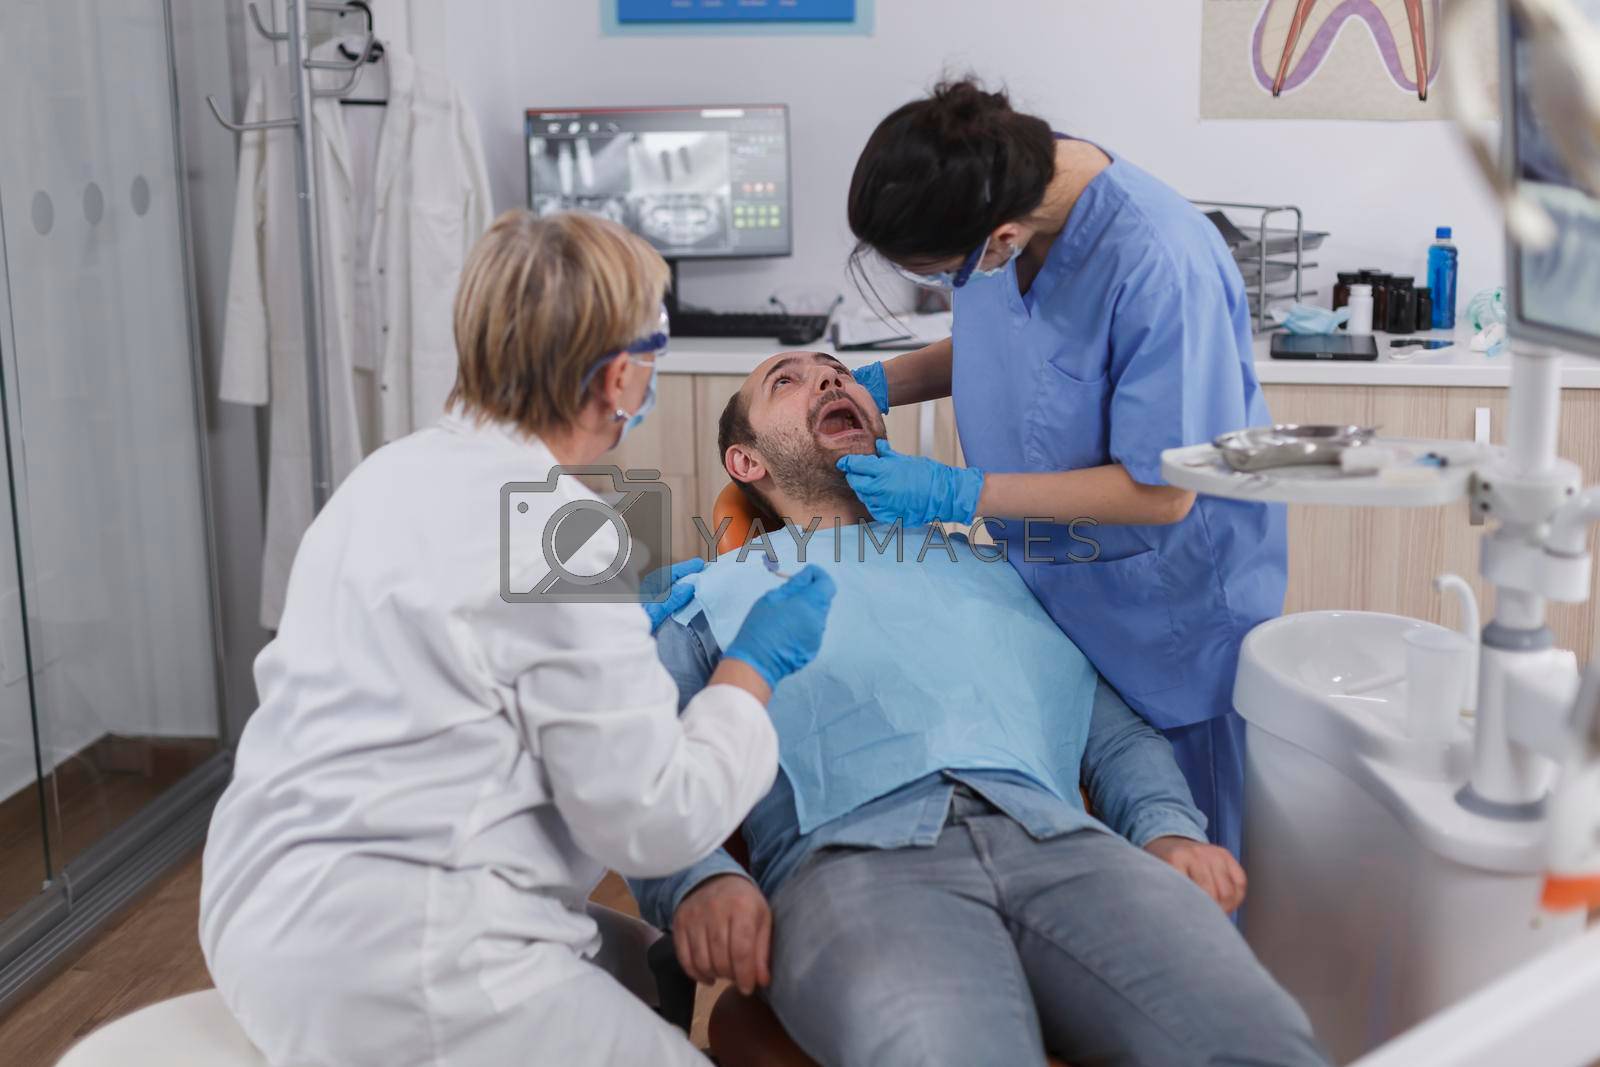 Dentist woman nurse checking patient mouth analyzing teeth infection using stomatological drill instrument during orthodontic examination in dental office room. Concept of dentistry procedure